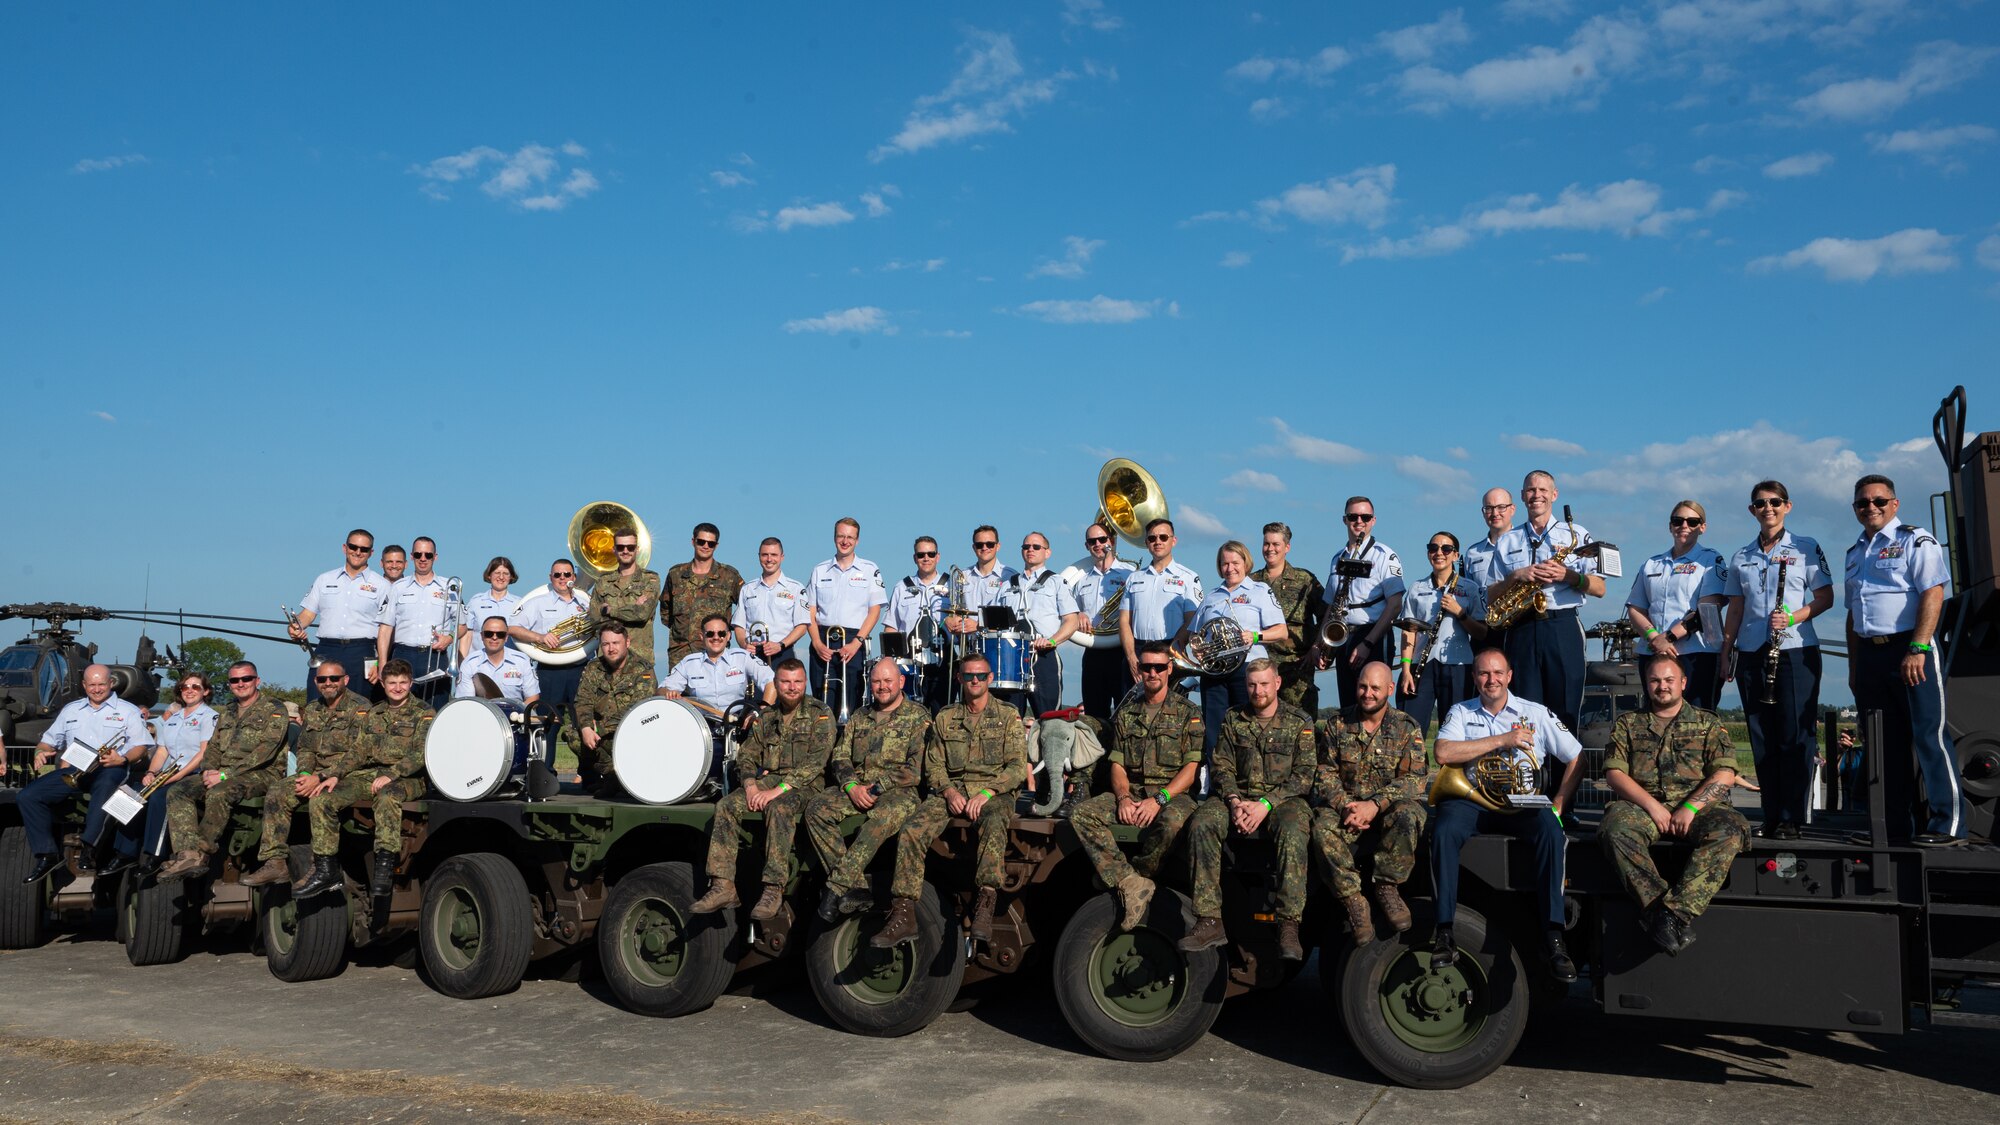 U.S. Air Force Airmen assigned to the U.S. Air Forces in Europe Ceremonial Band, and German armed forces personnel, pose for a group photo during the NATO Days event at Leoš Janáček Airport in Ostrava, Czech Republic, Sept. 16, 2023.